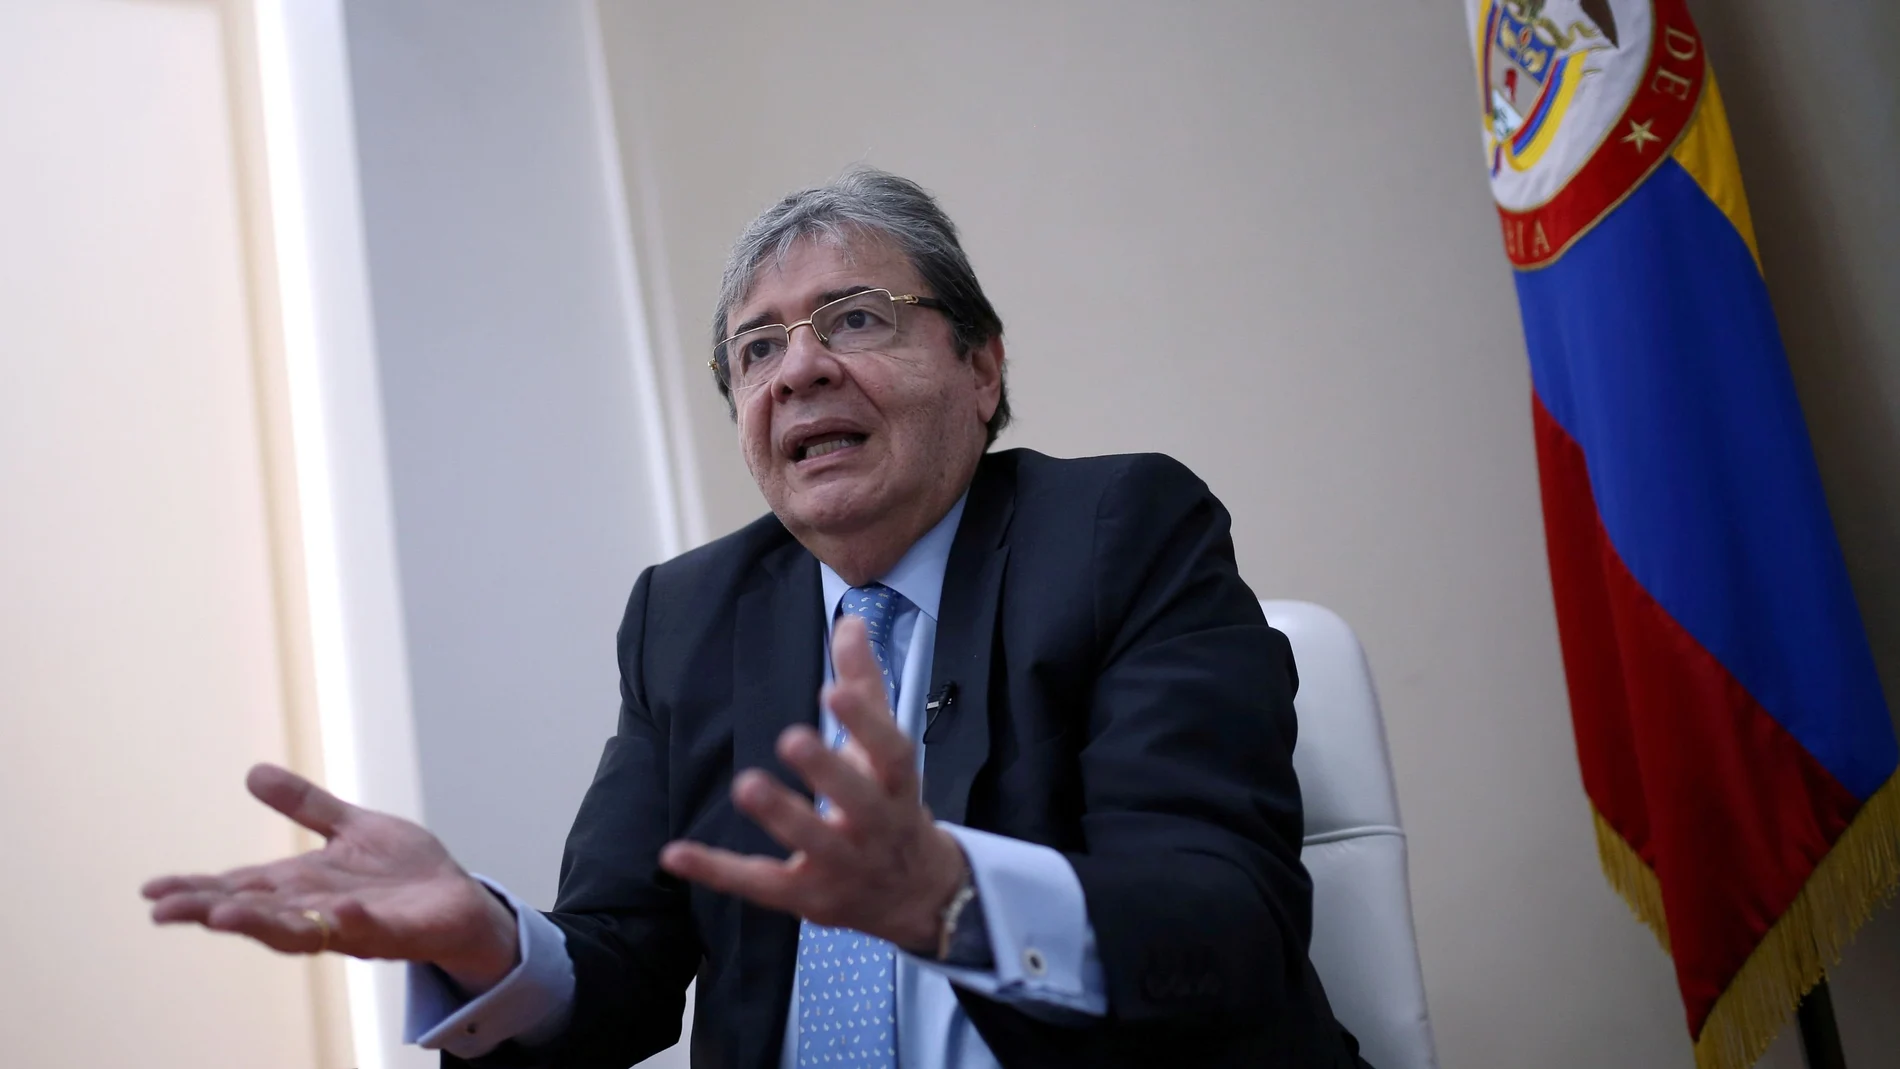 FILE PHOTO: Colombian Minister of Defense Carlos Holmes Trujillo speaks during an interview with Reuters in Bogota, Colombia November 27, 2020. Picture taken November 27, 2020. REUTERS/Luisa Gonzalez/File Photo